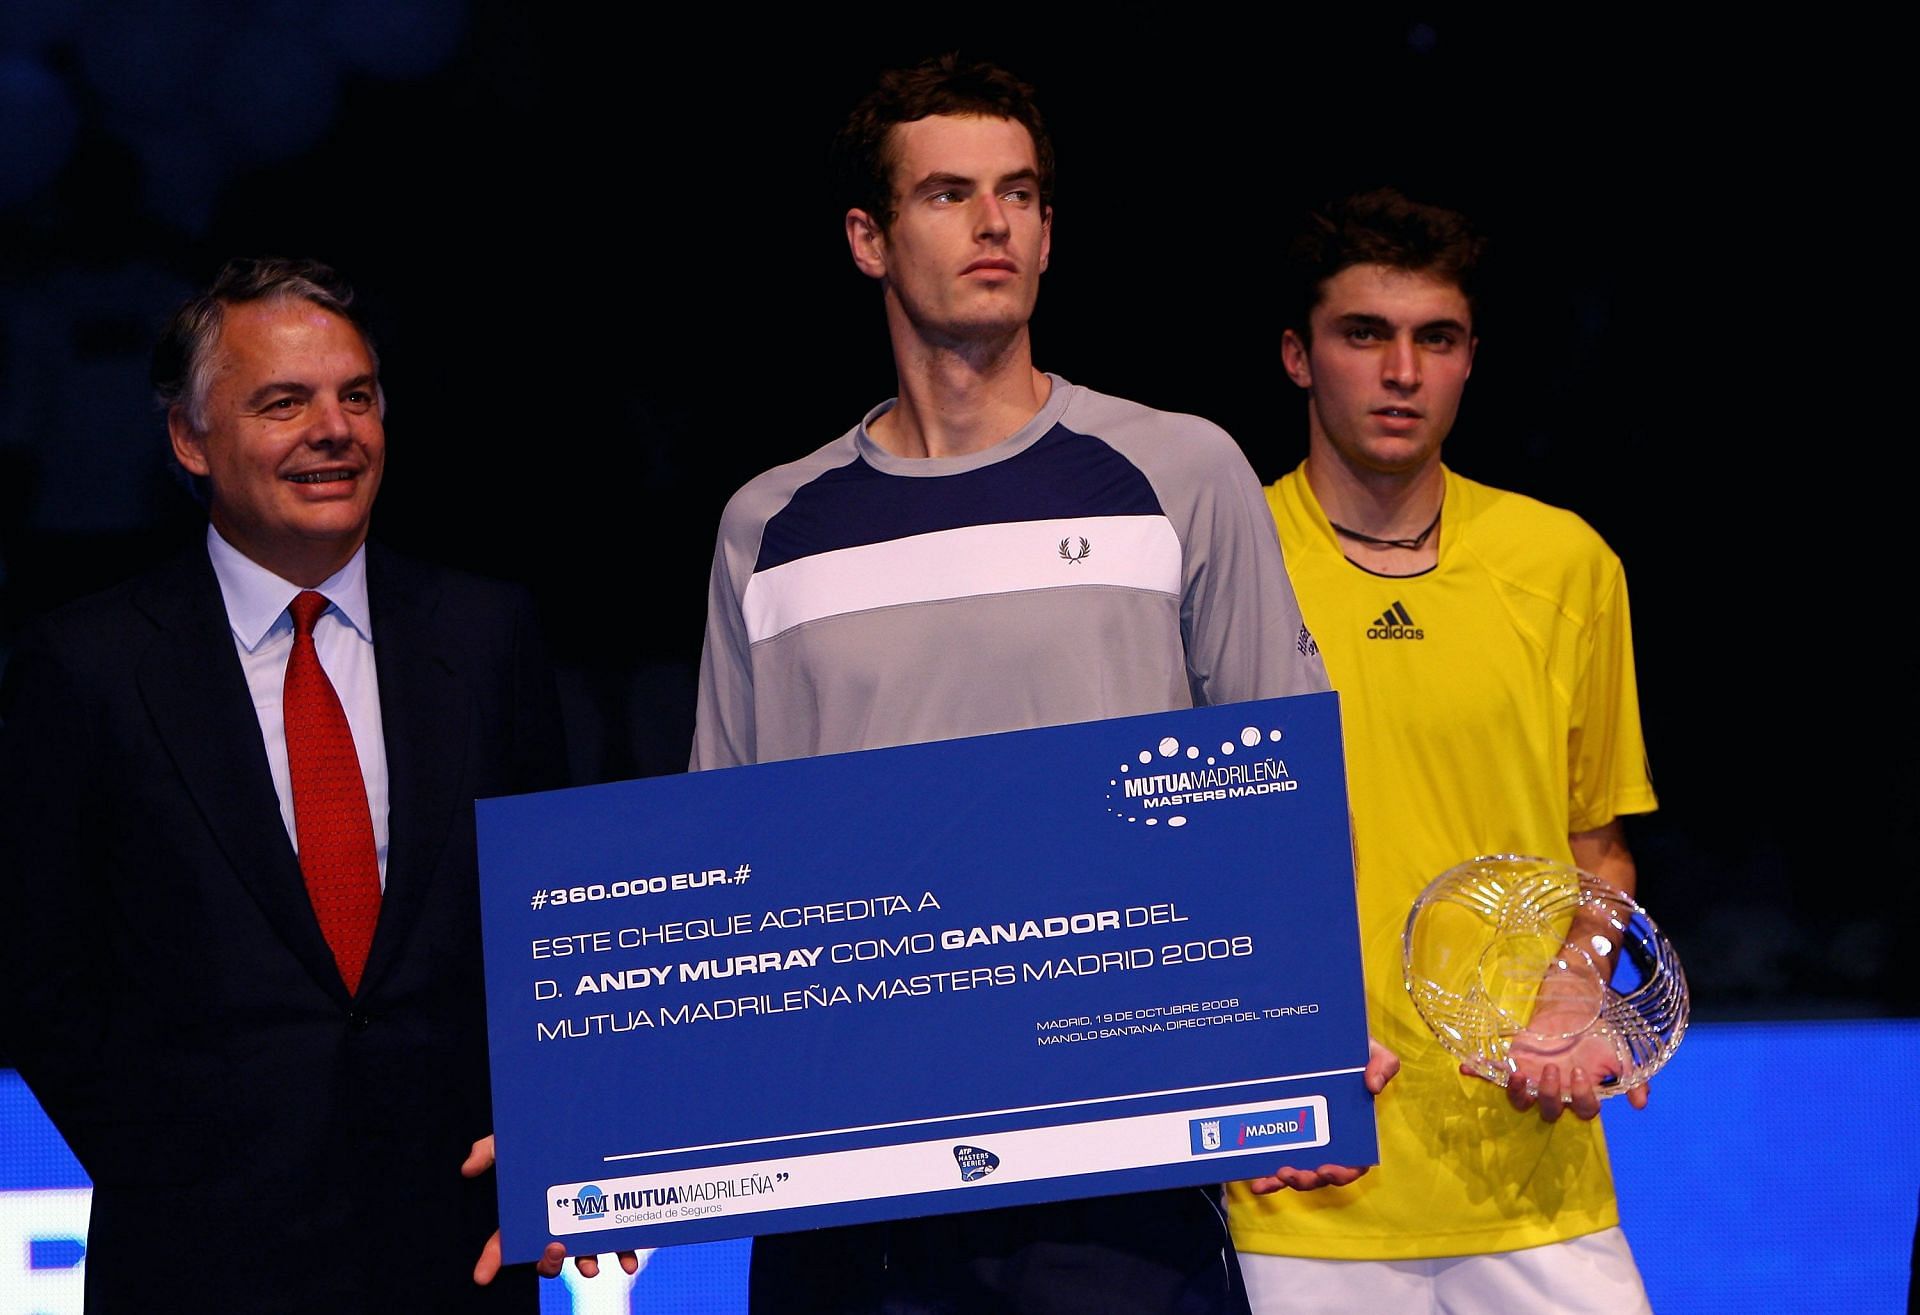 Andy Murray won the 2008 Madrid Masters title